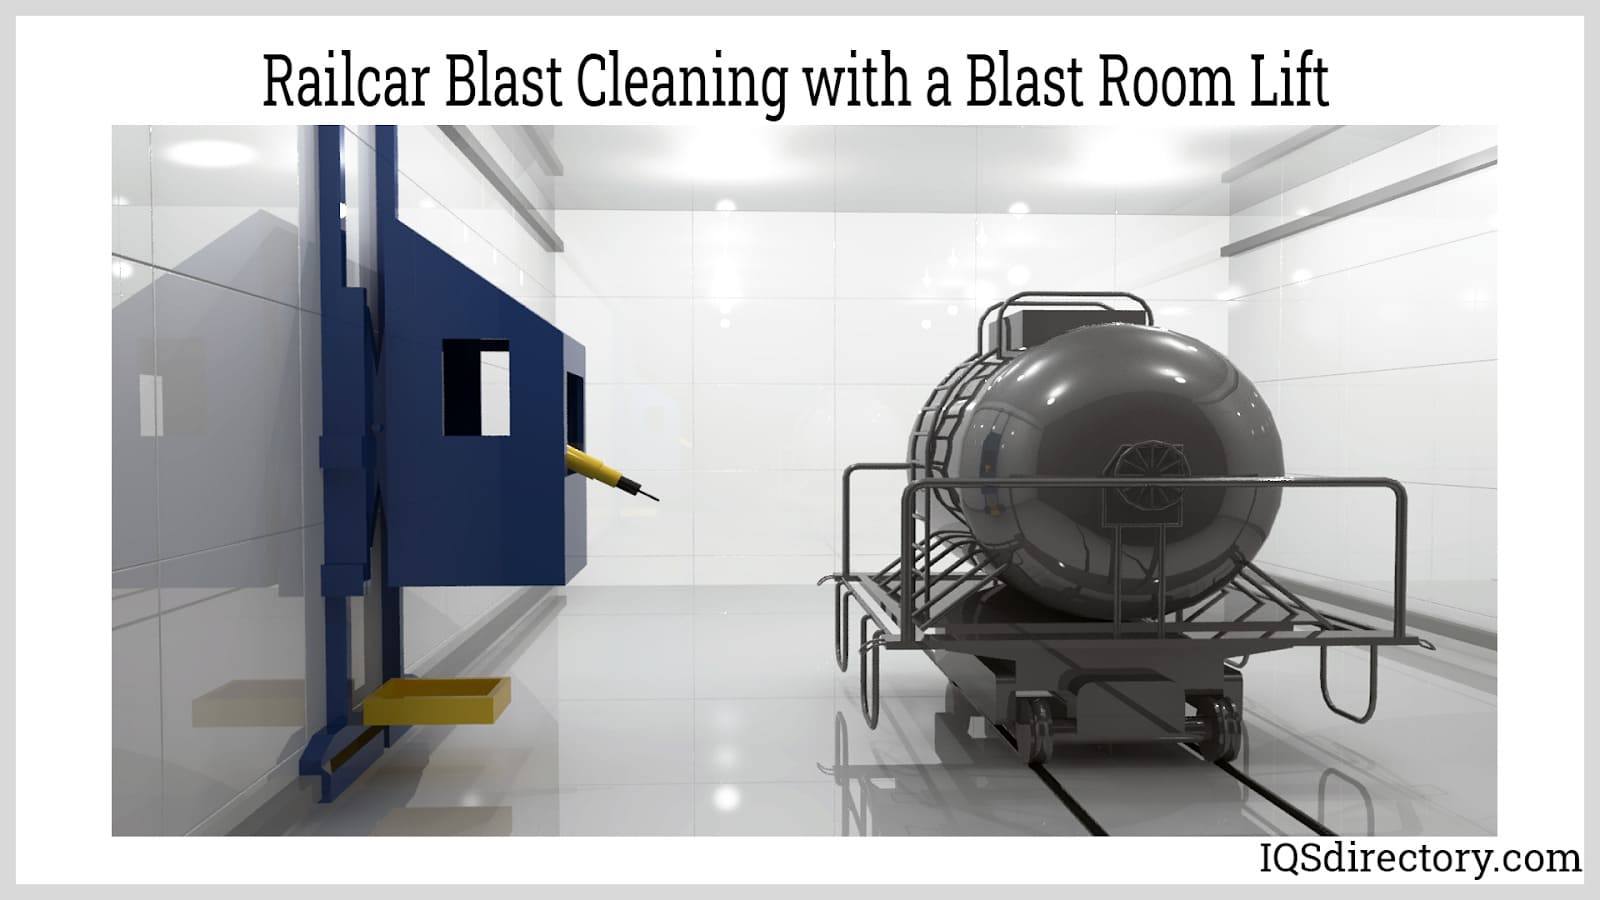 Railcar Blast Cleaning with a Blast Room Lift